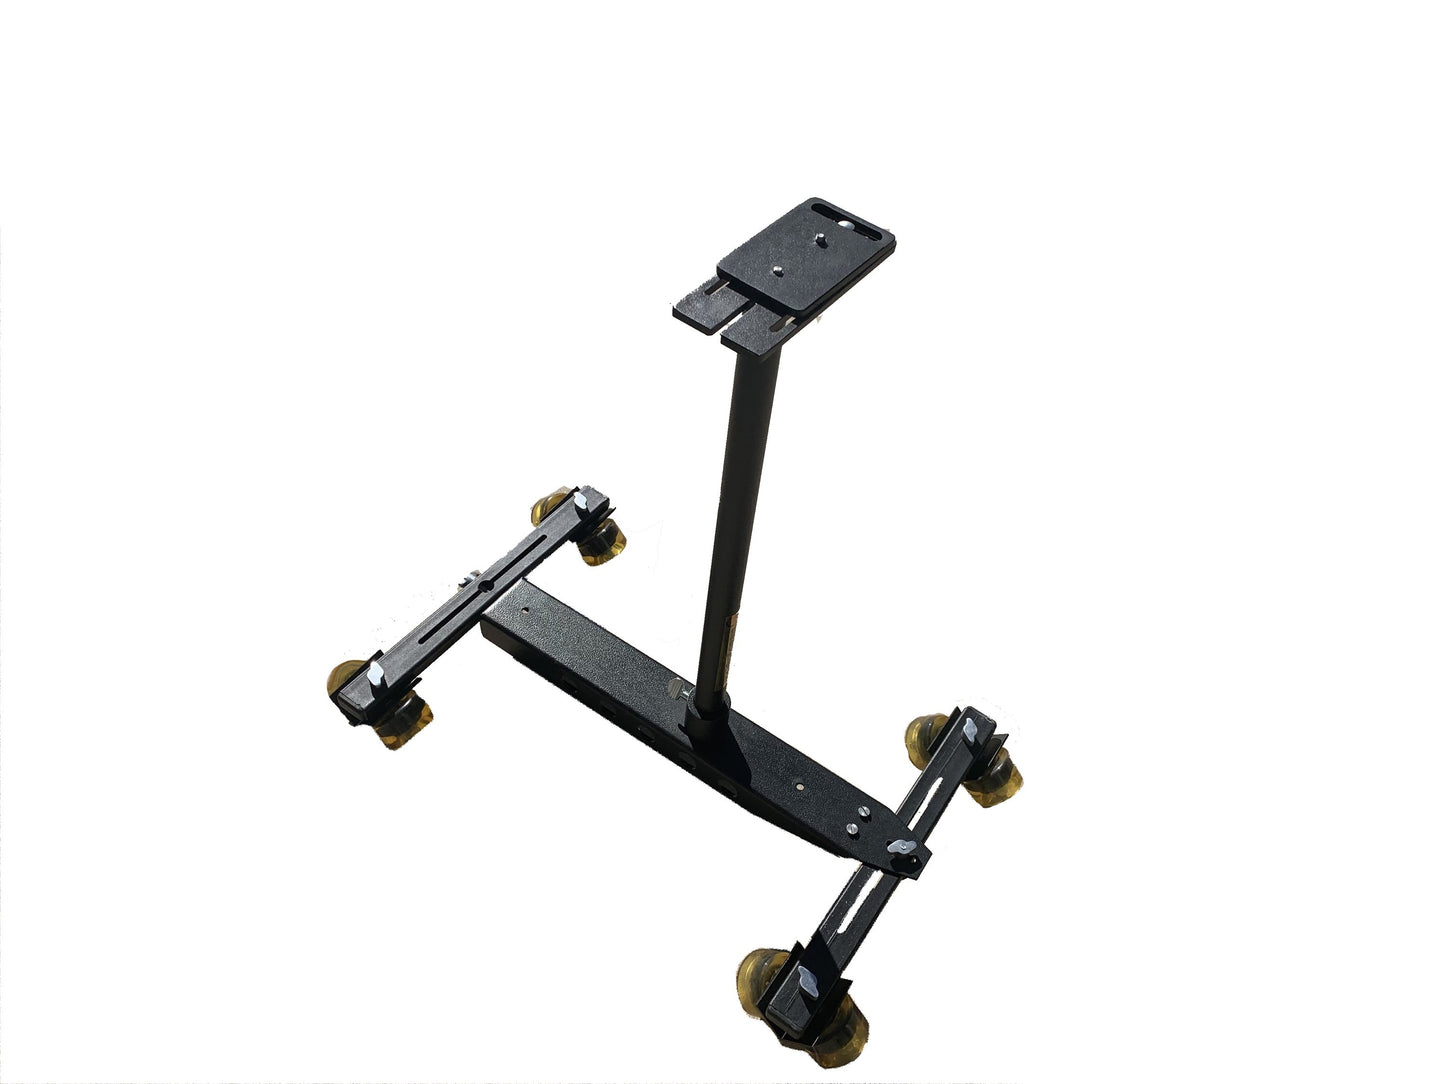 CobraCrane Collapsible Tracking Dolly and 15' track & 6' jib